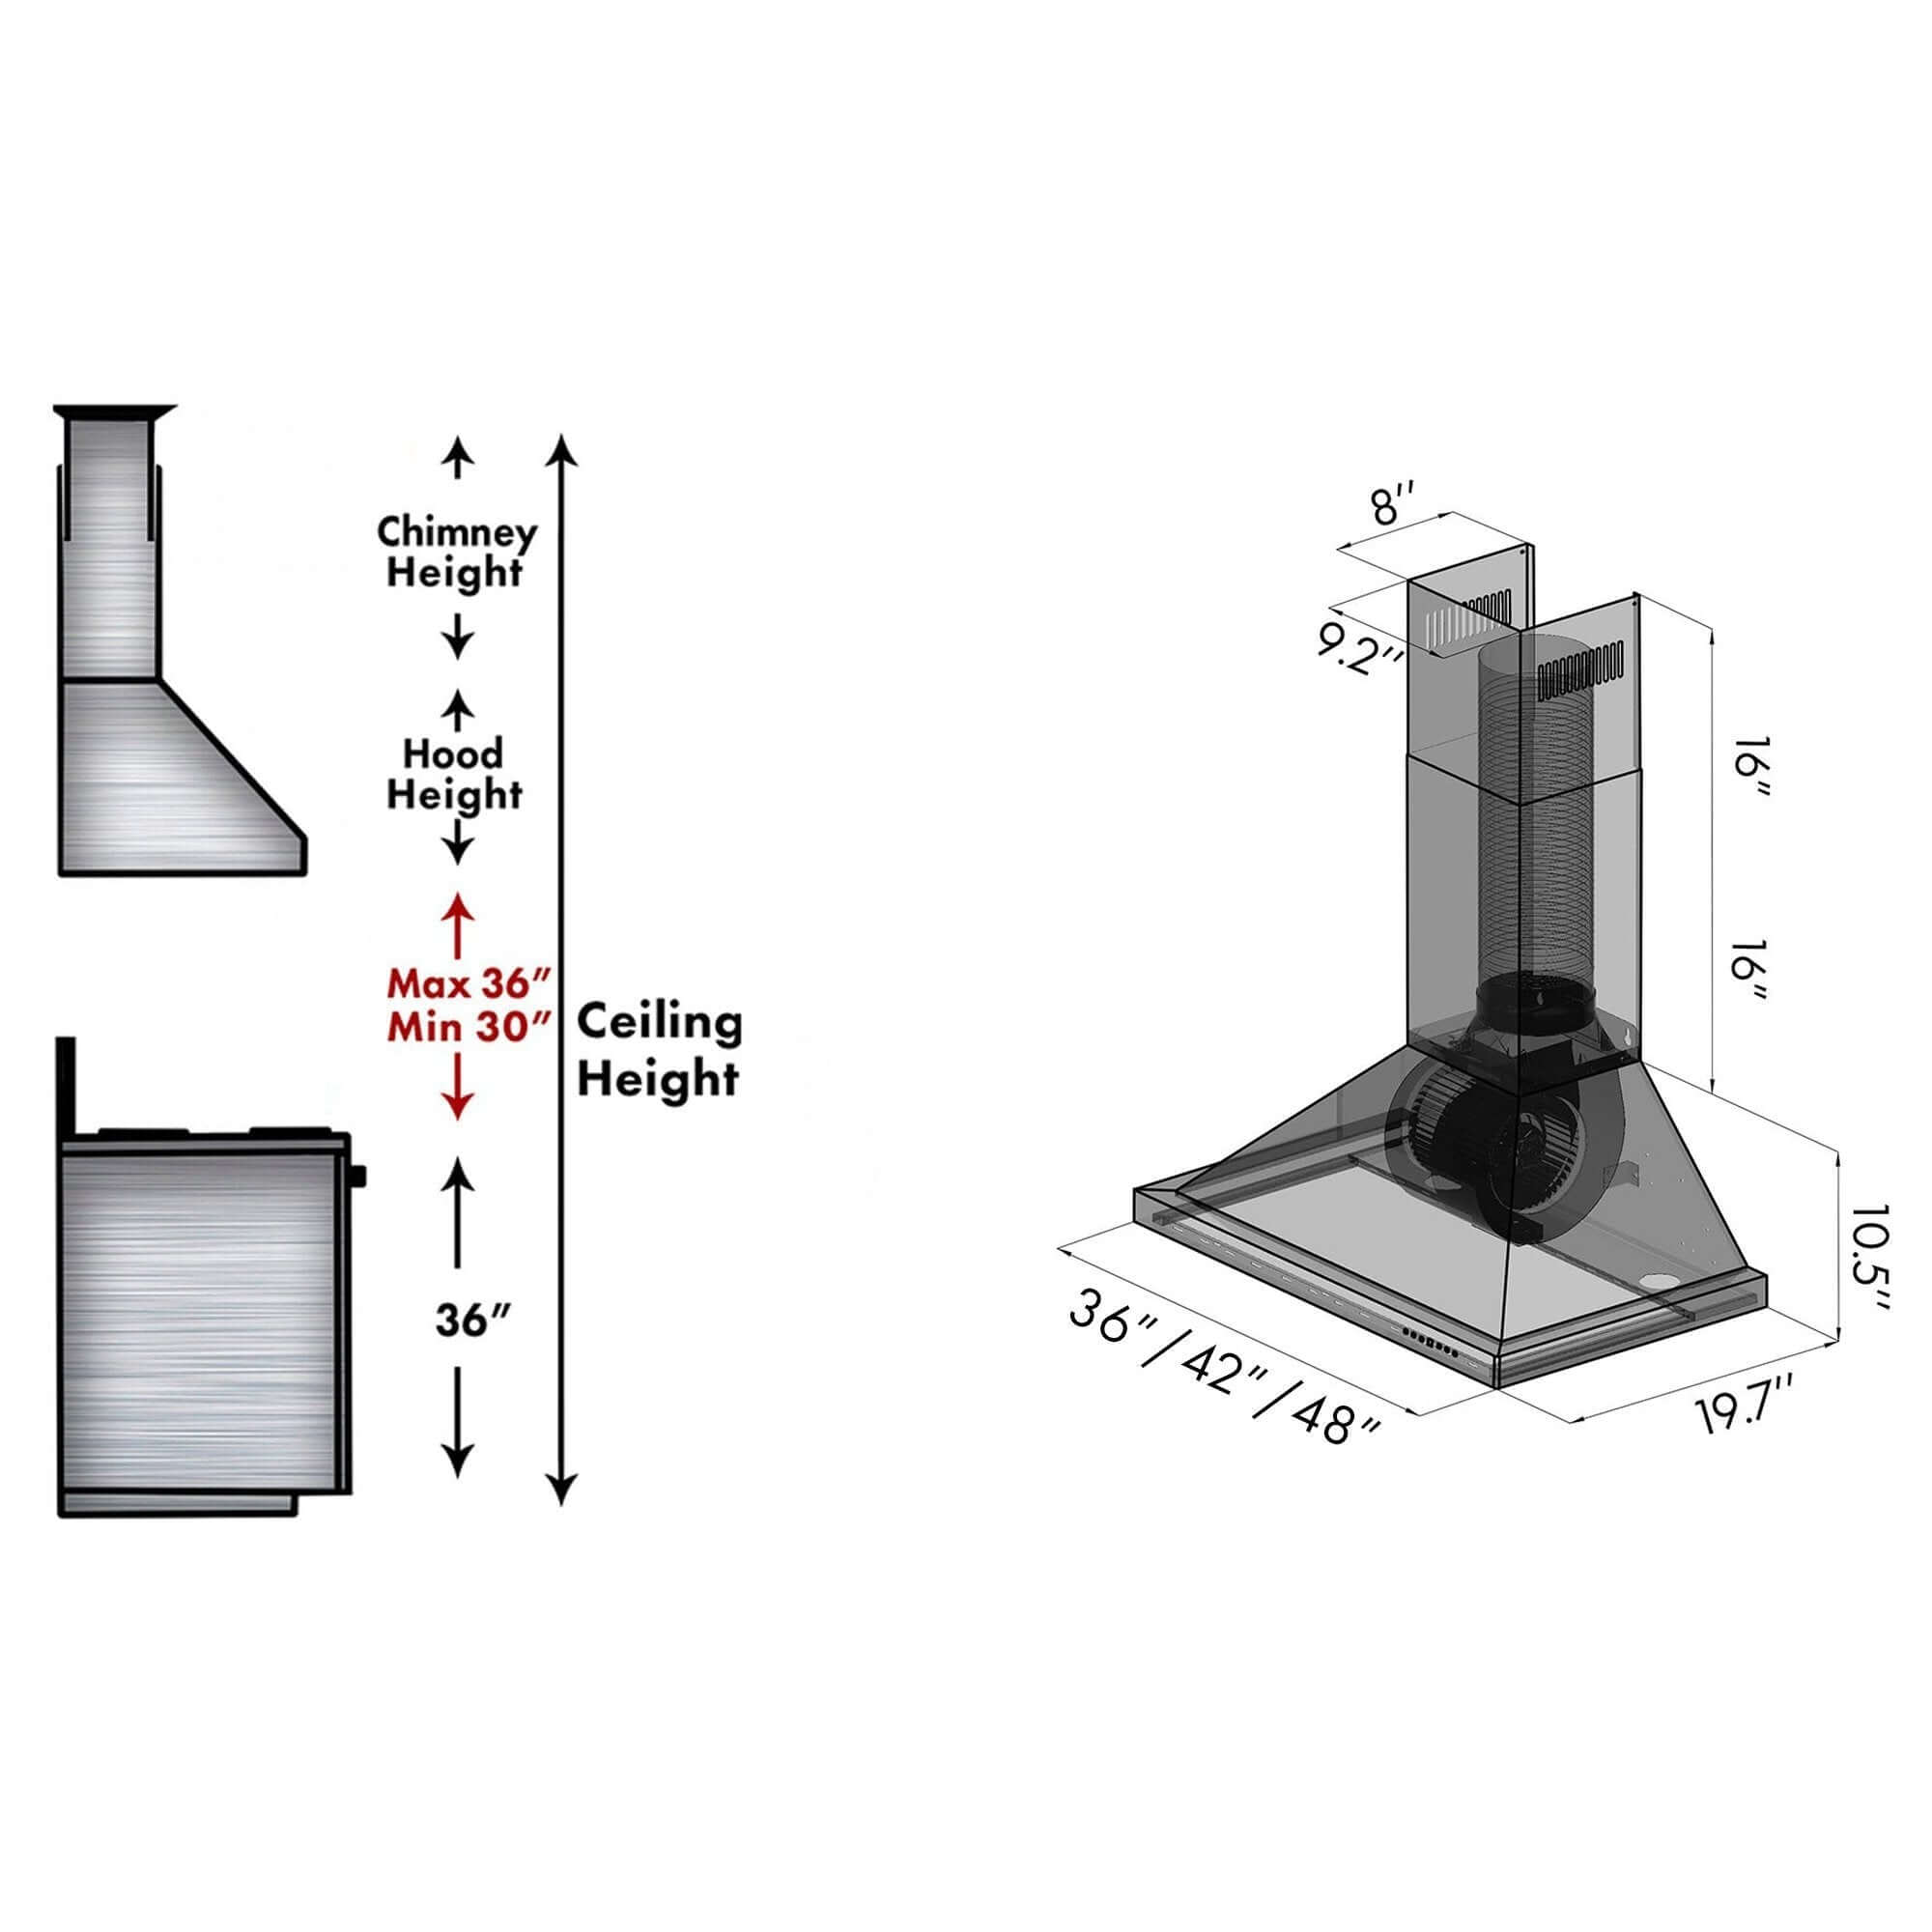 ZLINE 36 in. Recirculating Wall Mount Range Hood with Charcoal Filters in Stainless Steel (KB-CF-36) dimensional measurements and chimney height guide